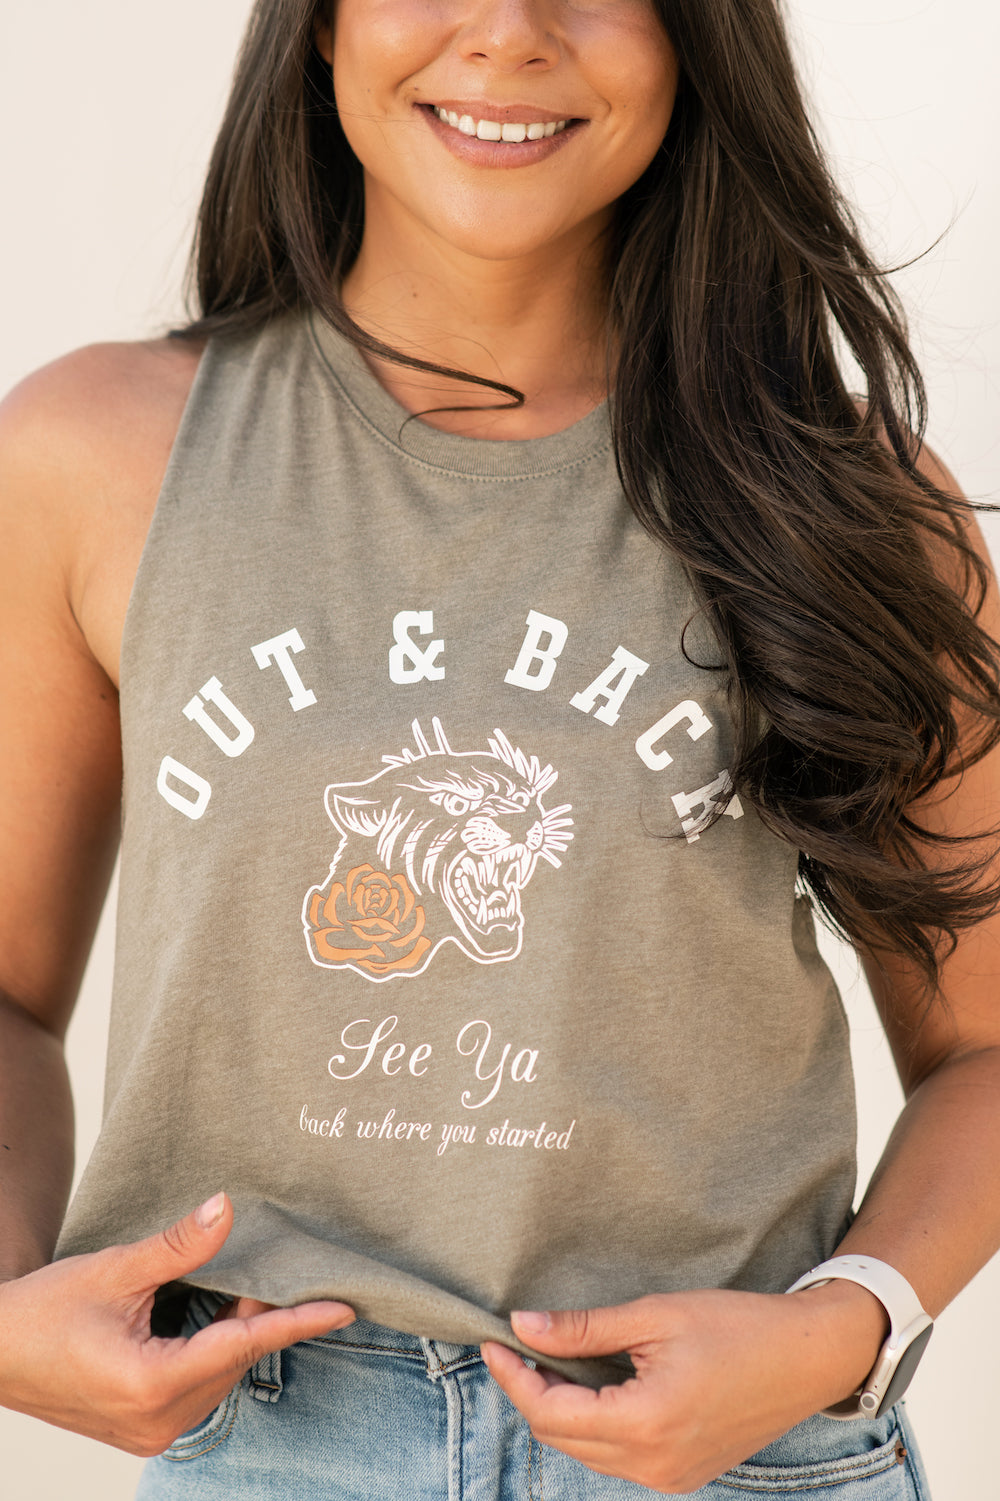 Out & Back Running Racerback Crop Tank